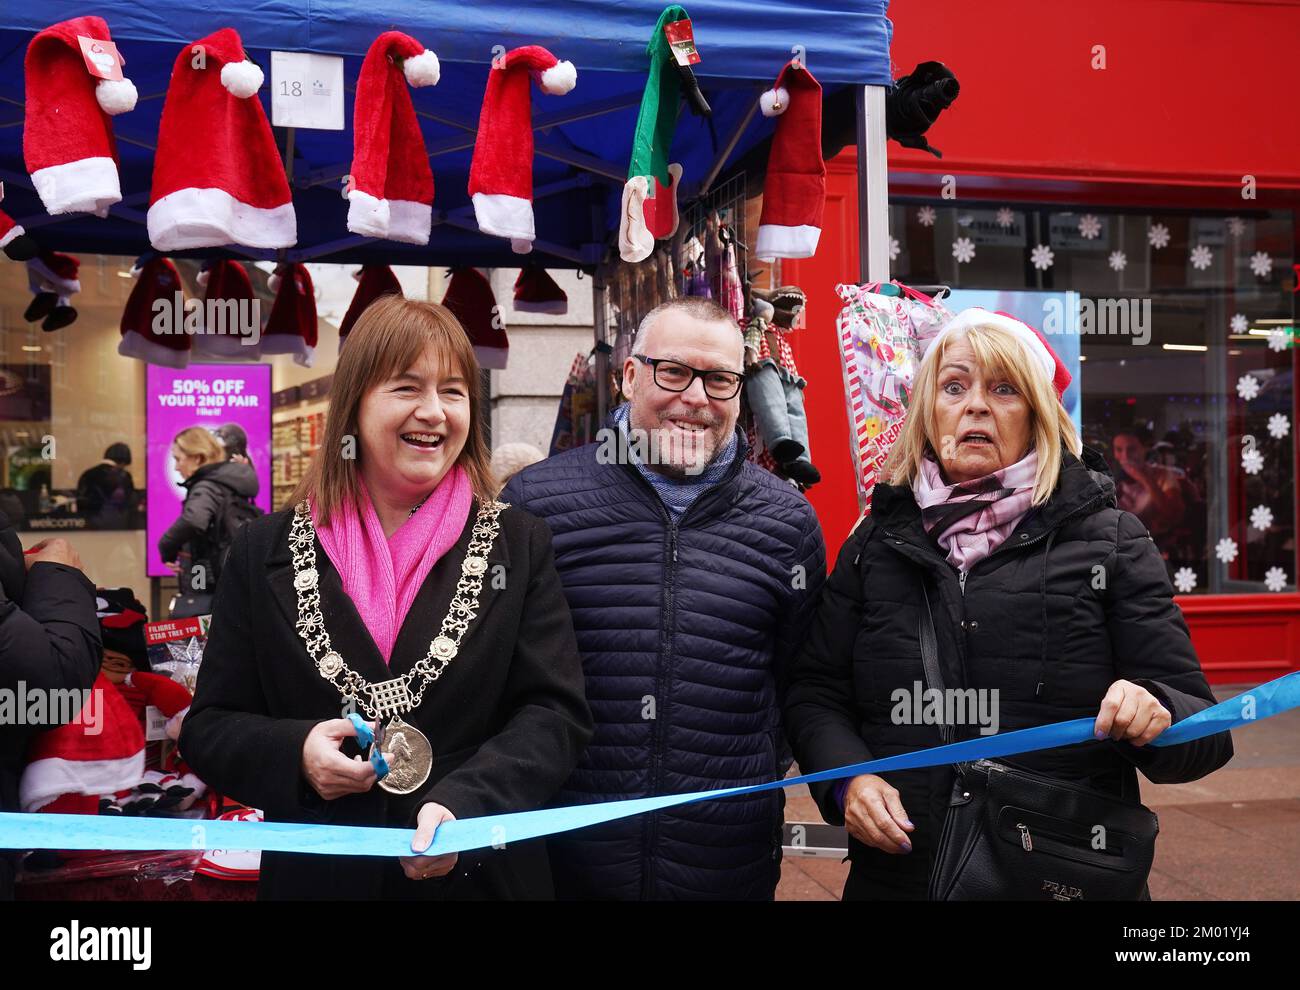 Lord Mayor of Dublin Caroline Conroy (right) along with Sadie Grace (right), Chairperson of the market, and Karl Mitchell of Dublin City Council, officially opens the Henry Street Christmas Market's in Dublin's city centre. This longstanding Christmas tradition is the oldest Christmas market in Dublin and has been a part of the city centre Christmas shopping experience over the last few decades. Picture date: Saturday December 3, 2022. Stock Photo